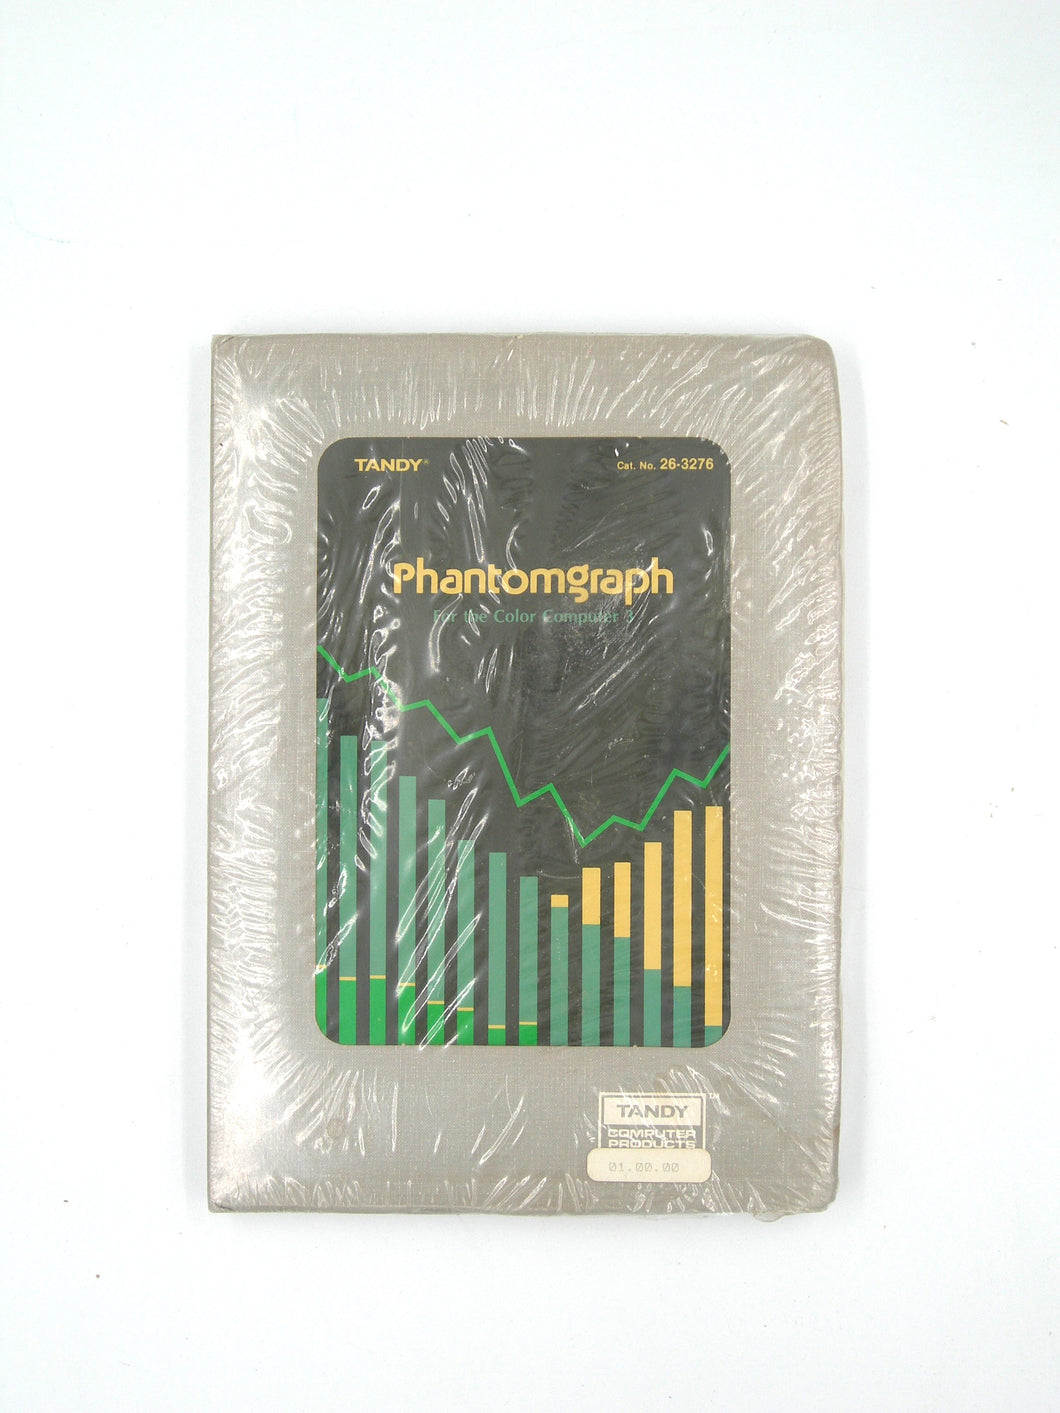 Tandy Color Computer 3 disk - Phantomgraph 26-3276 (sealed)